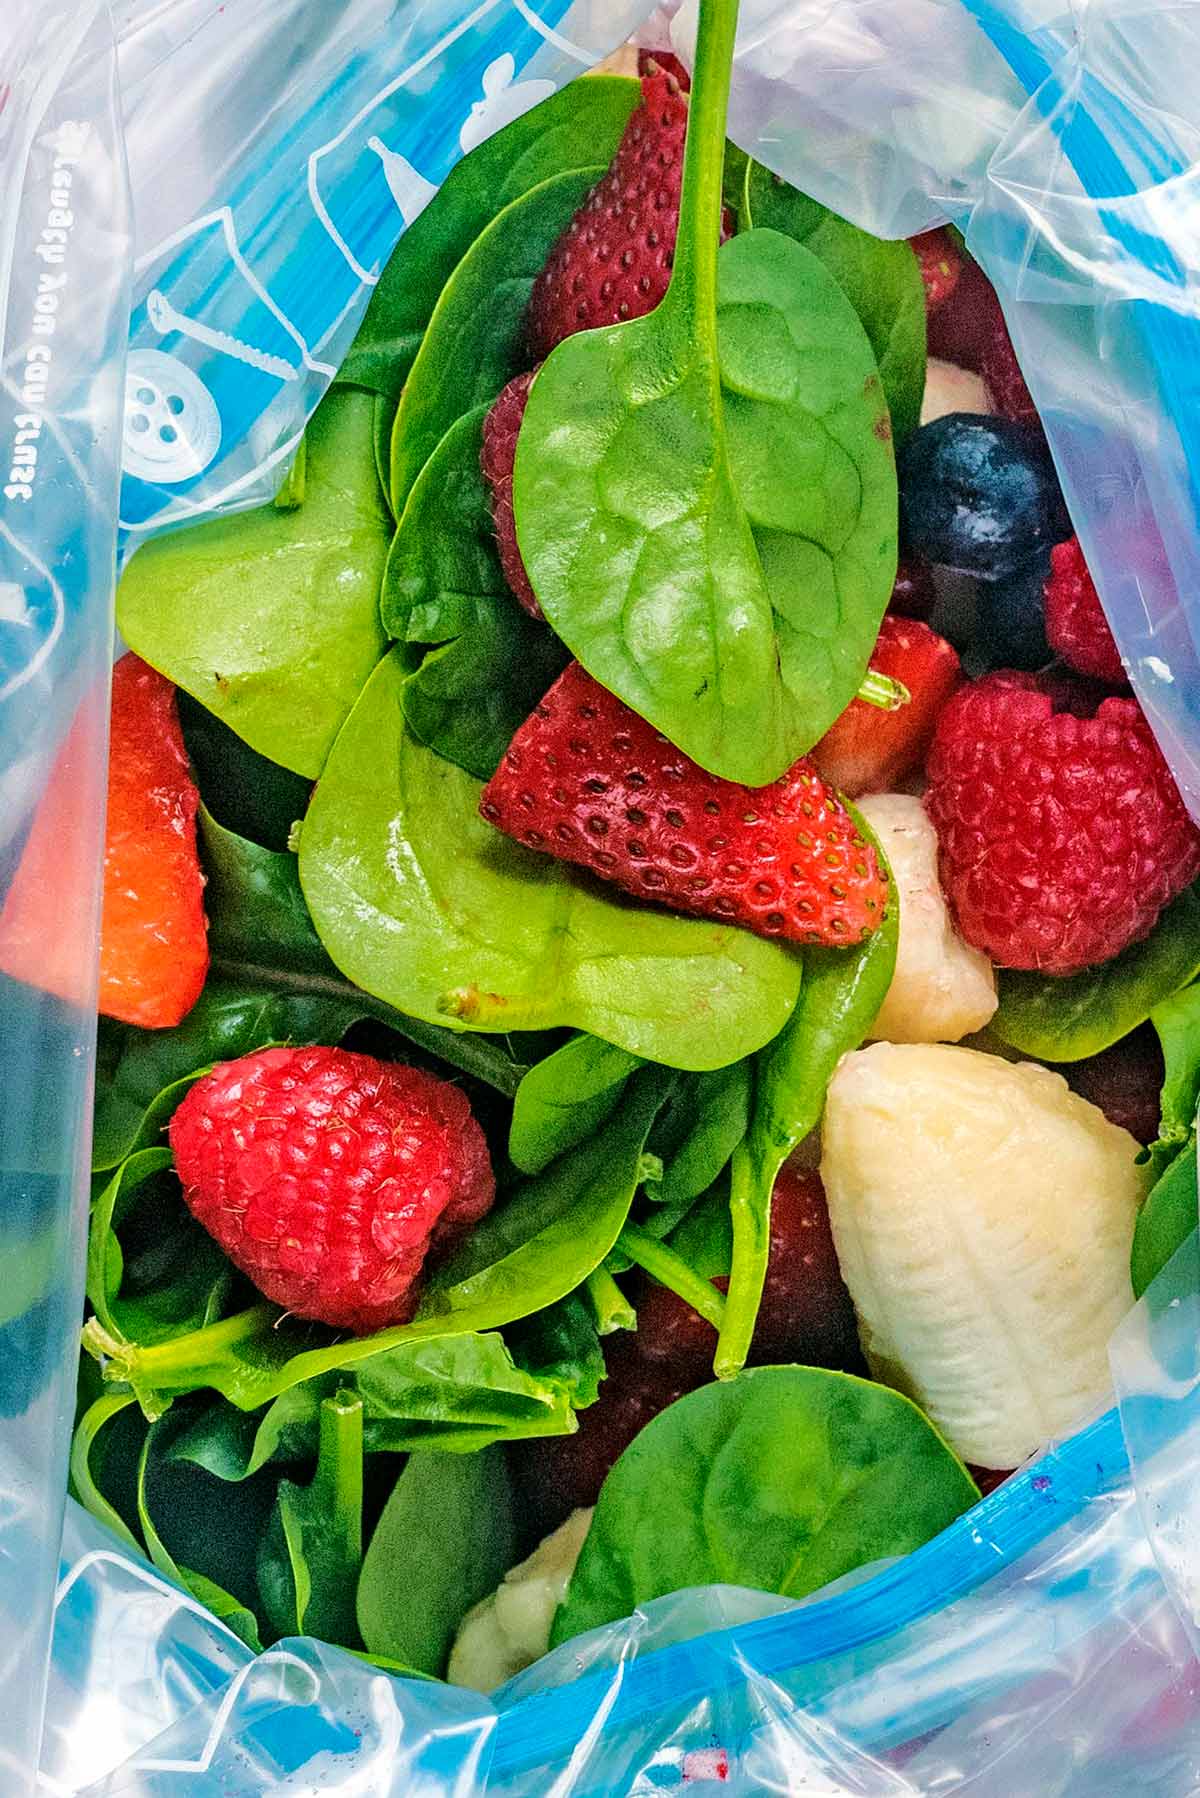 An open ziploc bag showing spinach leaves and berries.